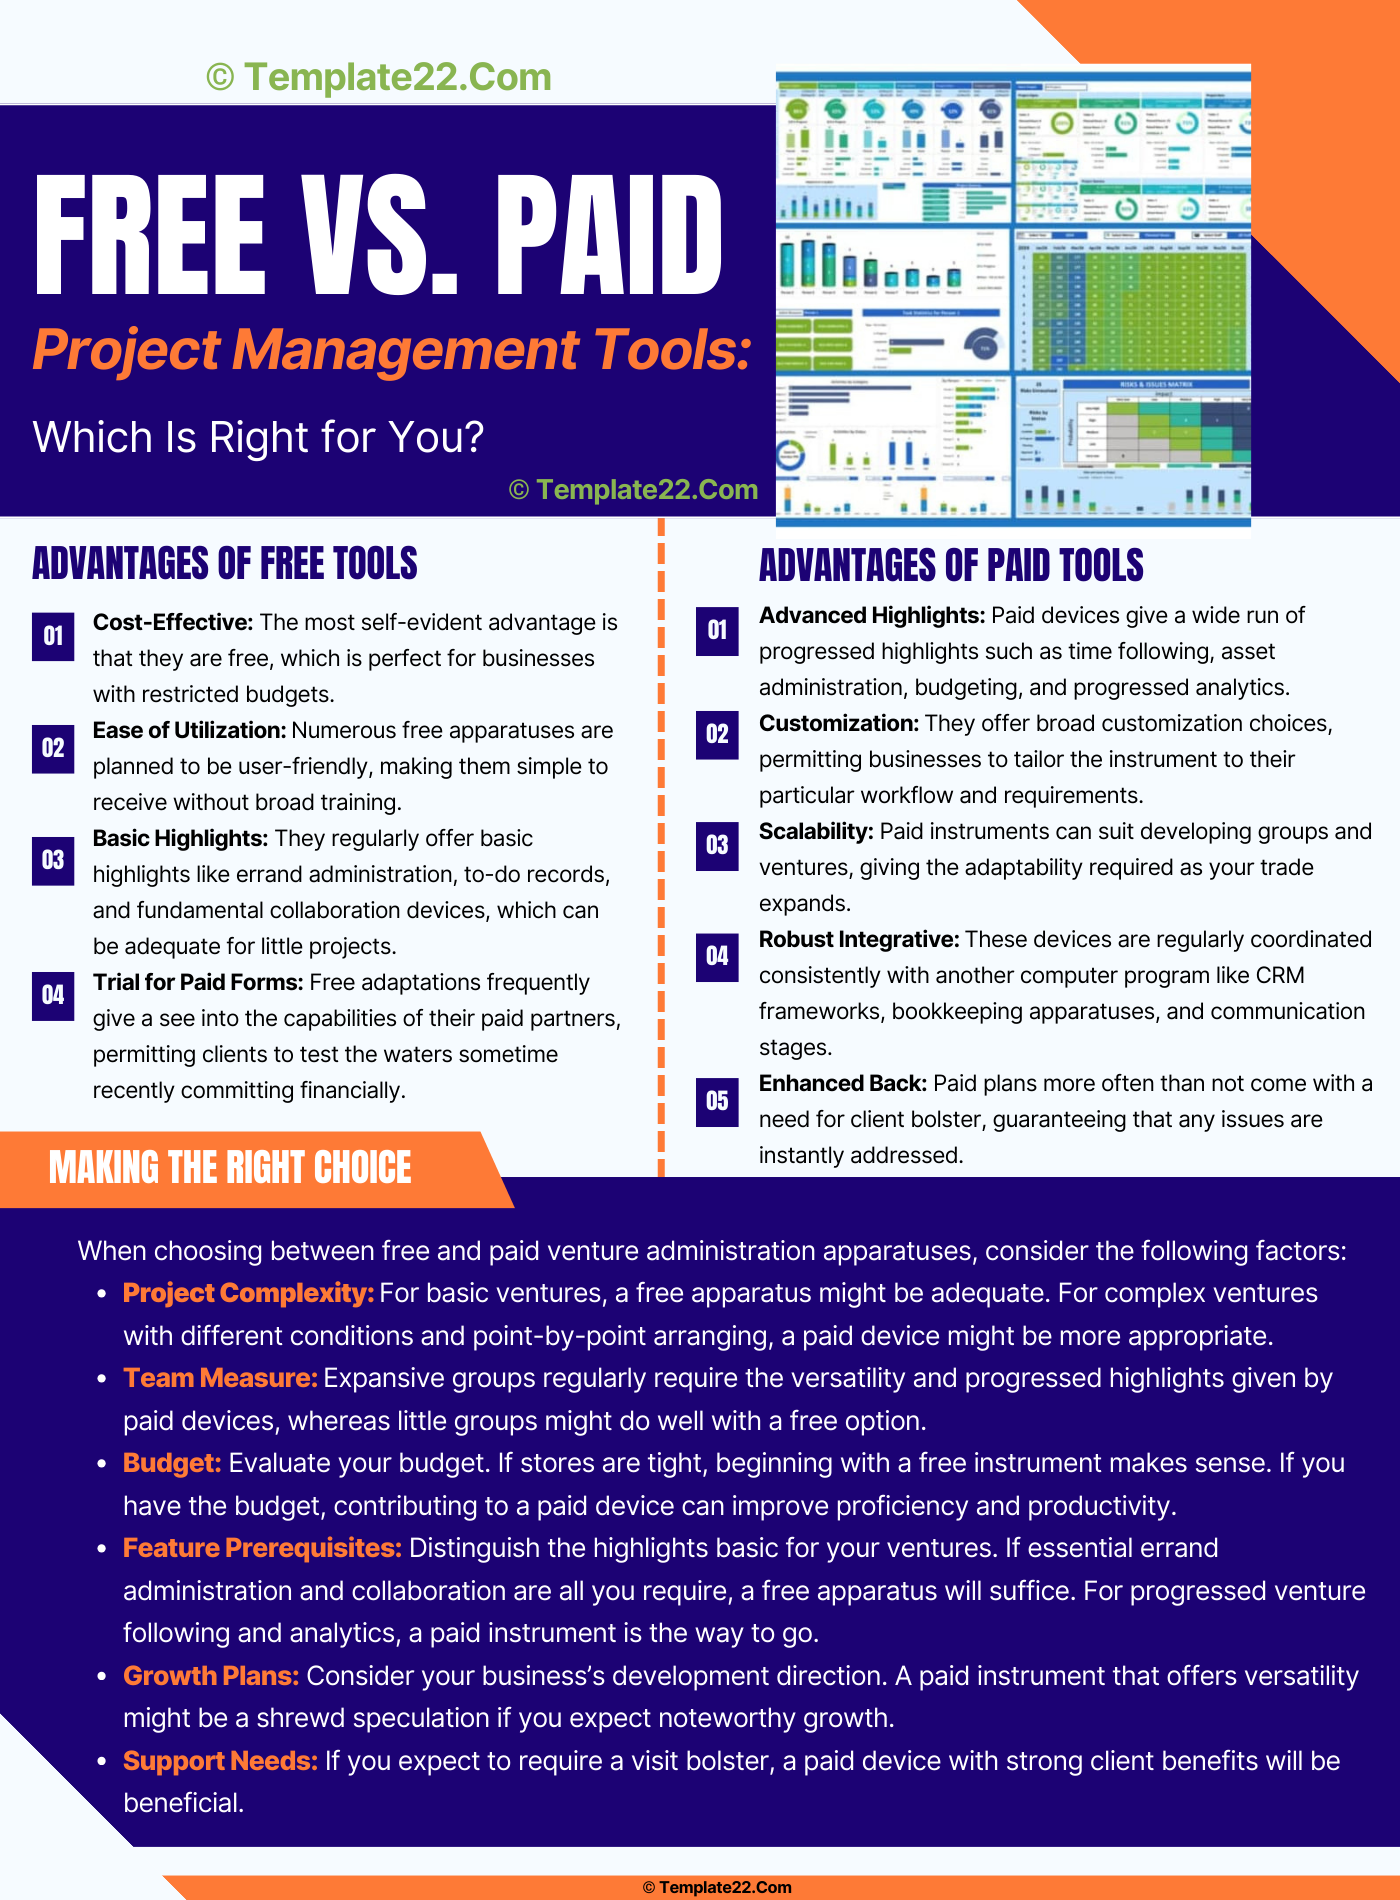 Free vs. Paid Project Management Tools: Which Is Right for You?